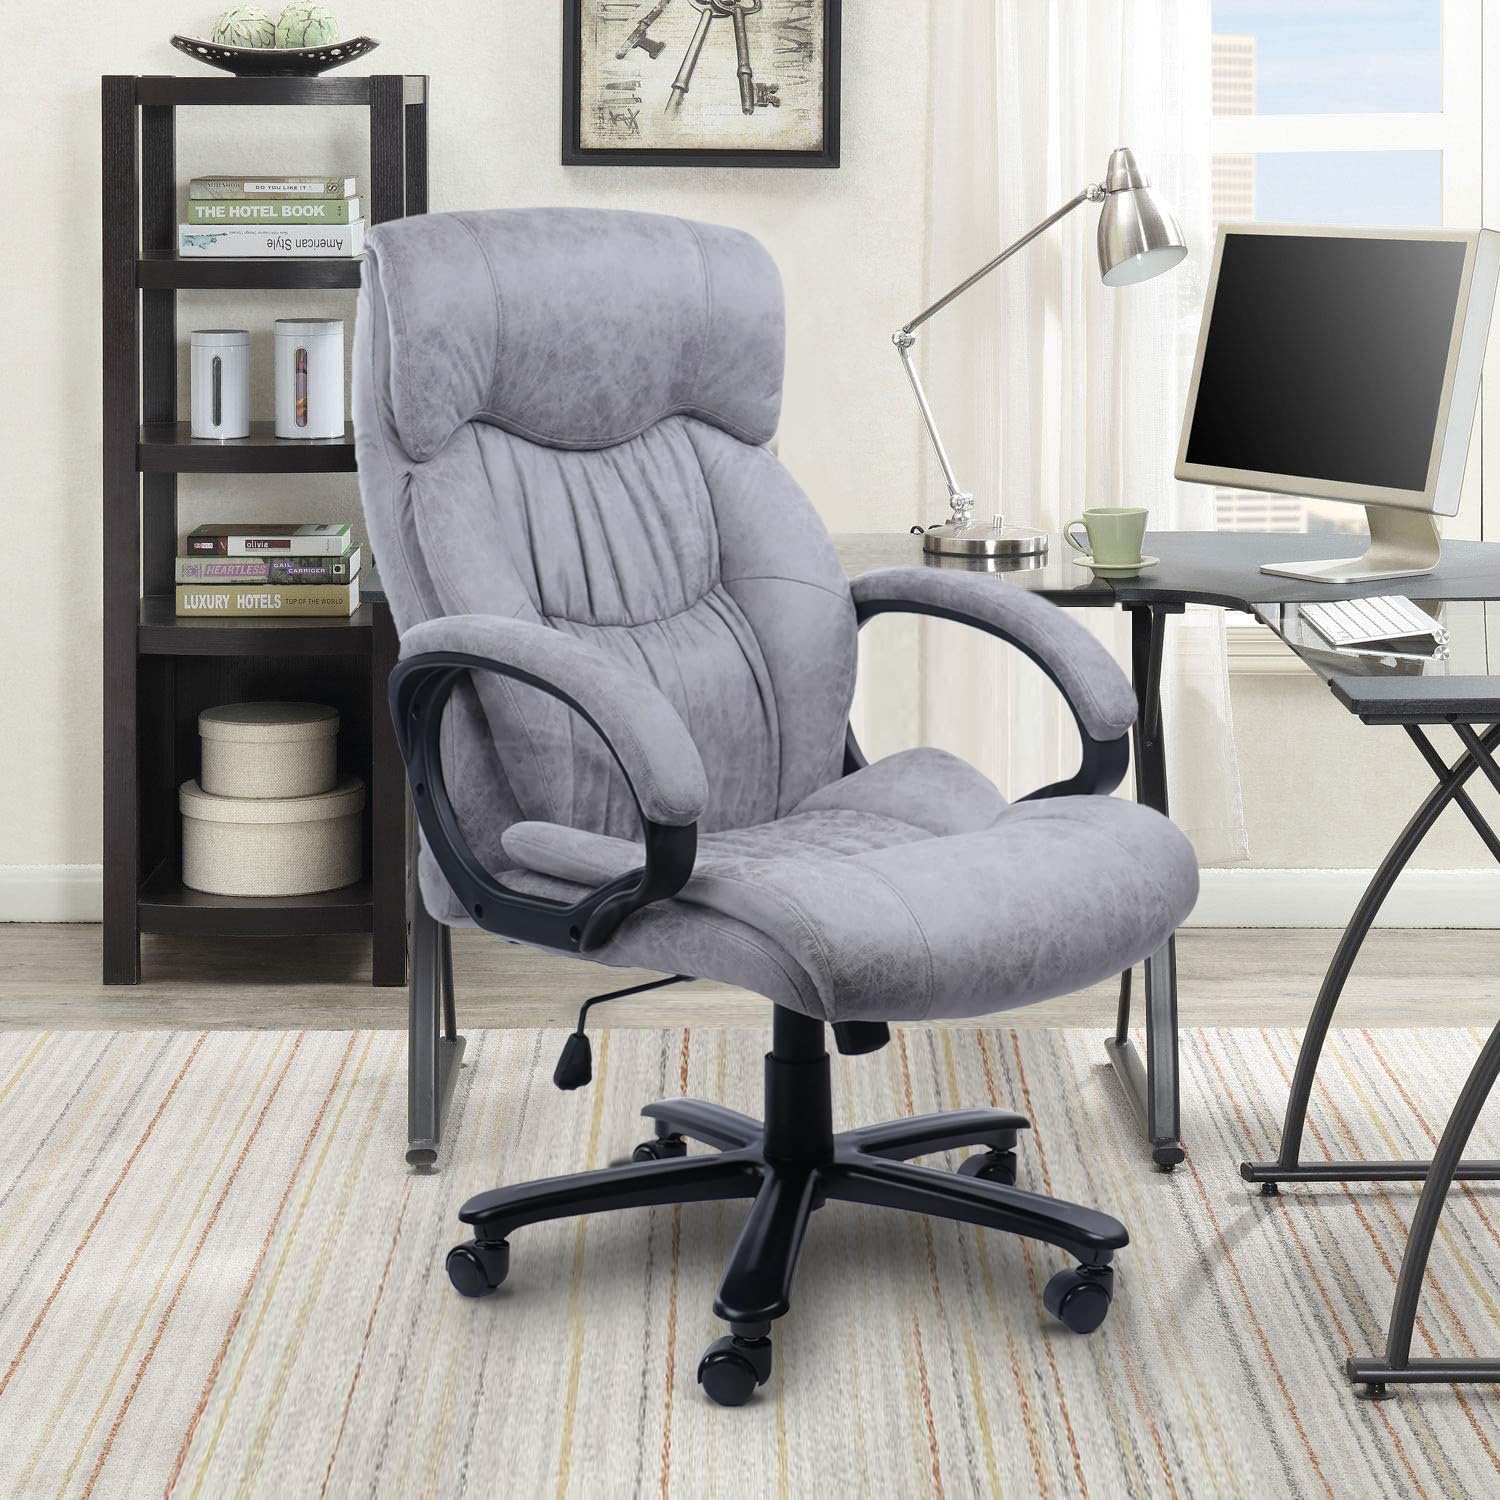 CLATINA Ergonomic Executive Big Tall Office Chair,Lumbar Support Breathable Leather Padded Headrest Armrest Swivel Adjustable Height Comfy Computer Desk Chair for Home Office(Grey)